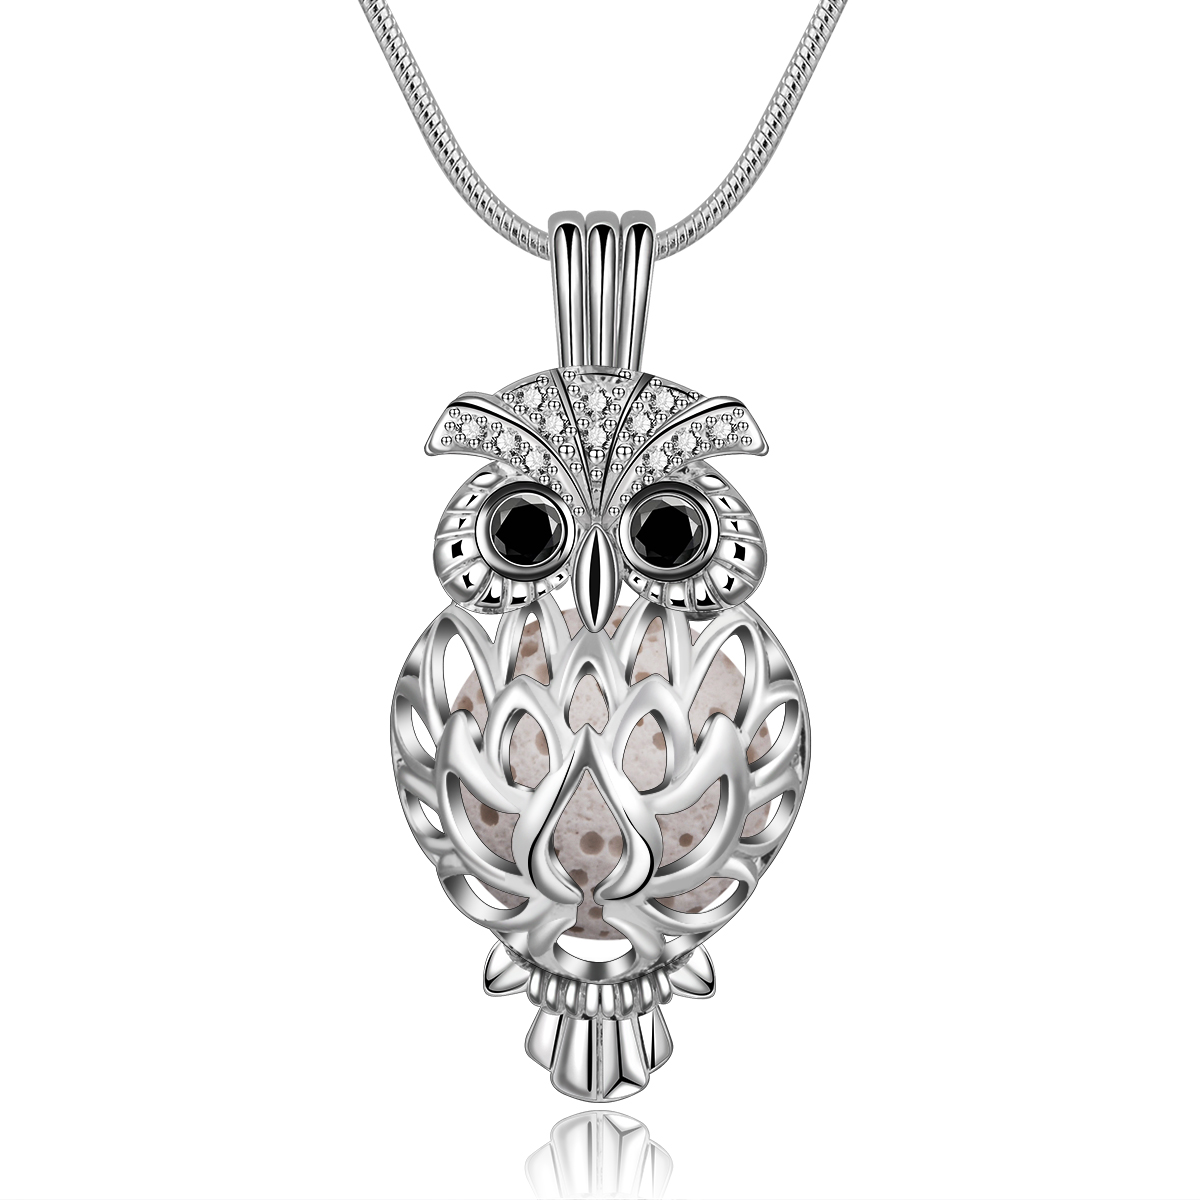 Merryshine Jewelry s925 sterling silver owl shaped cage essential oil lava stone necklaces for women